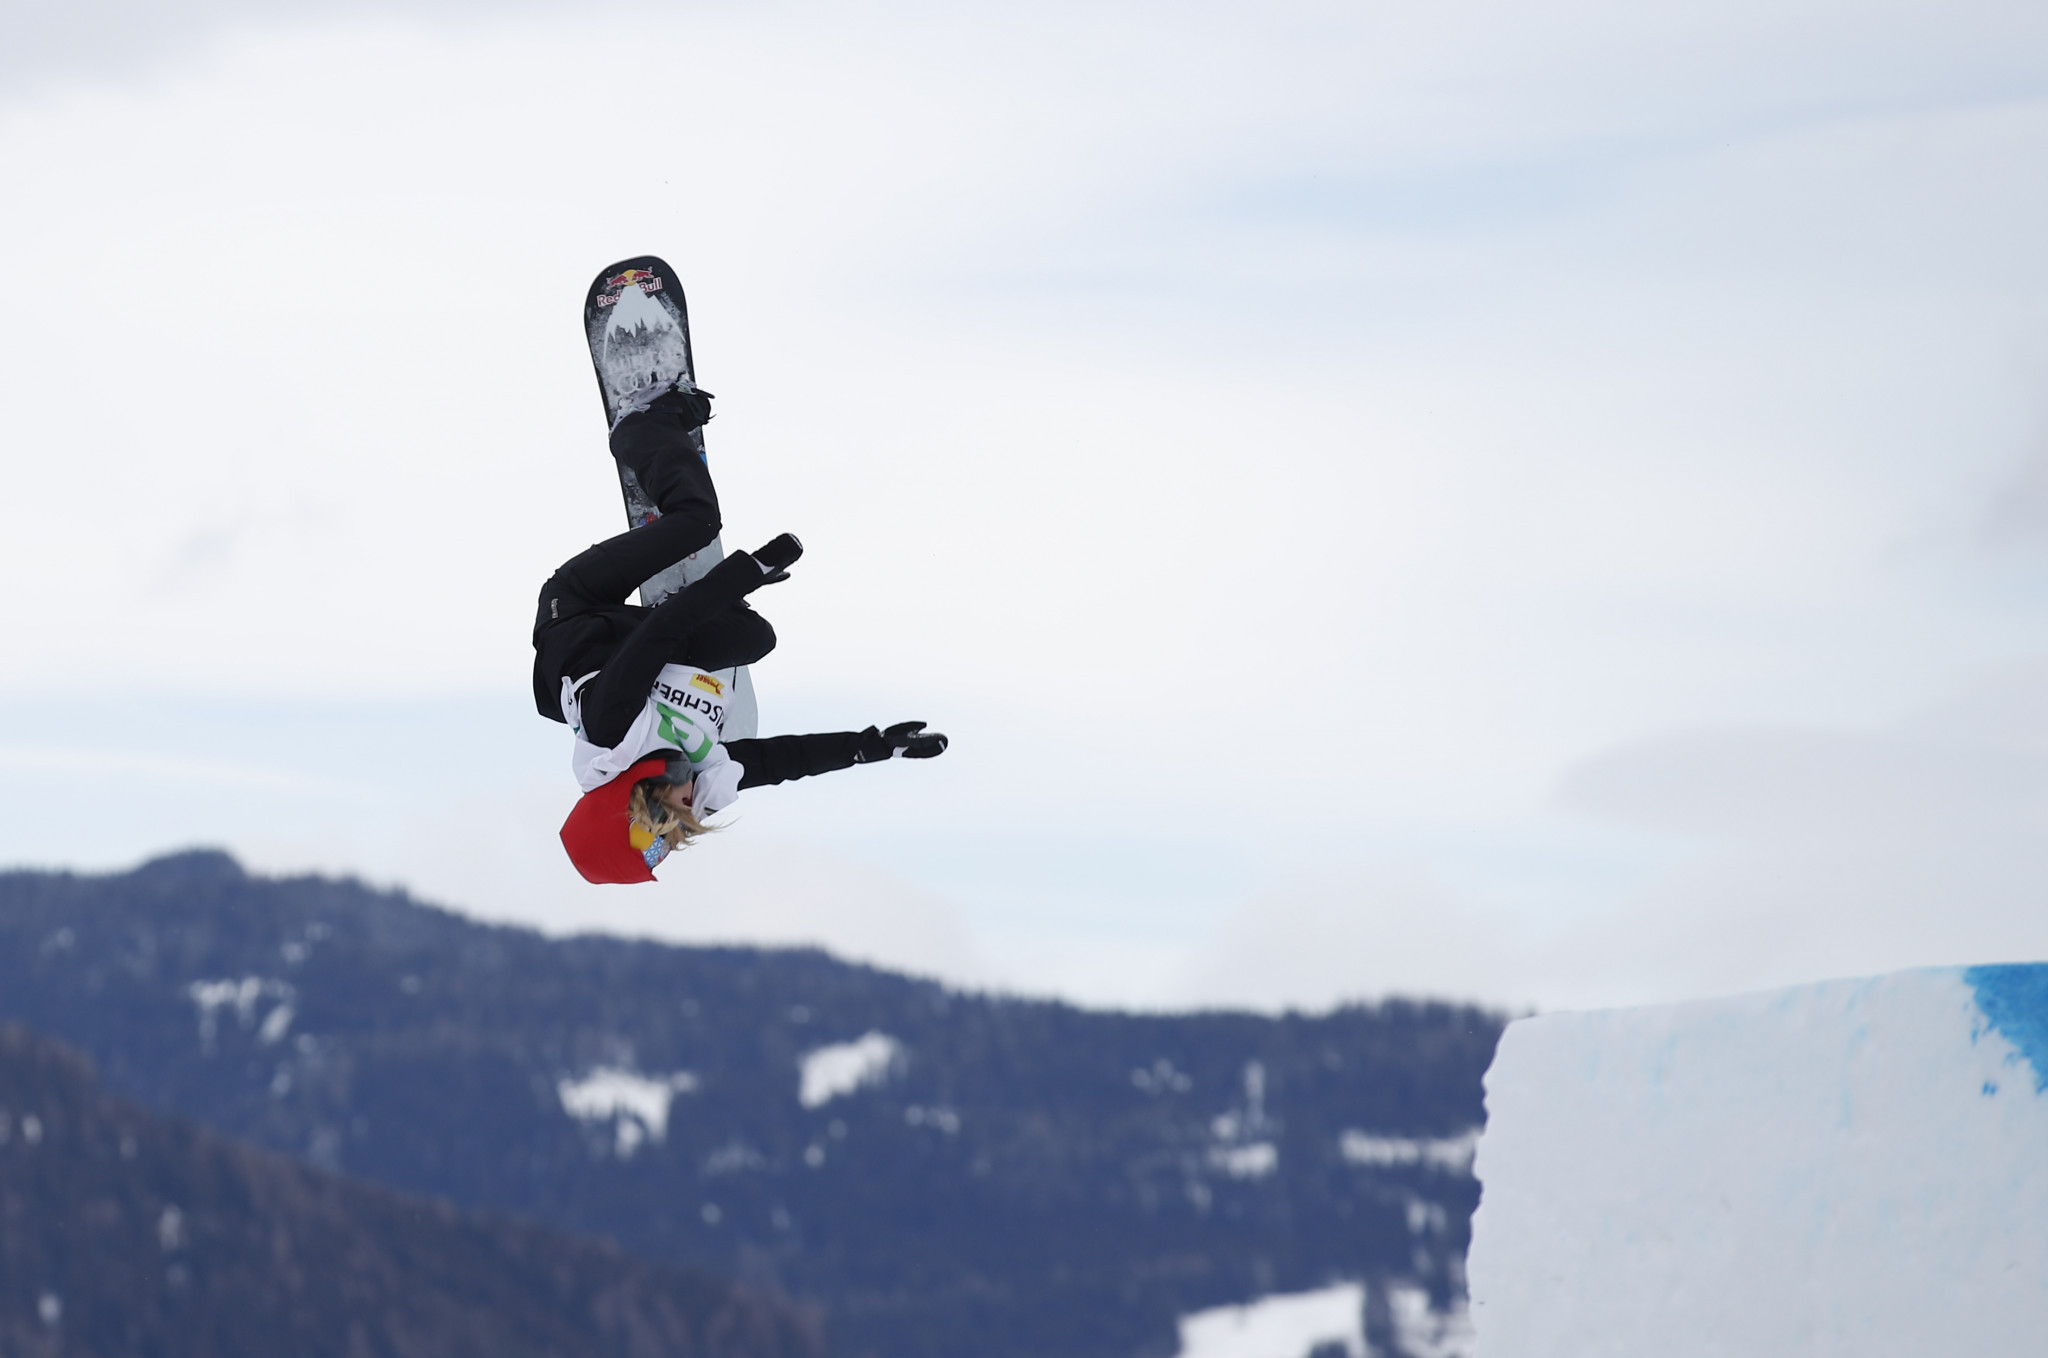 Olympic champions prepare to compete at 23rd edition of Winter X Games in Aspen